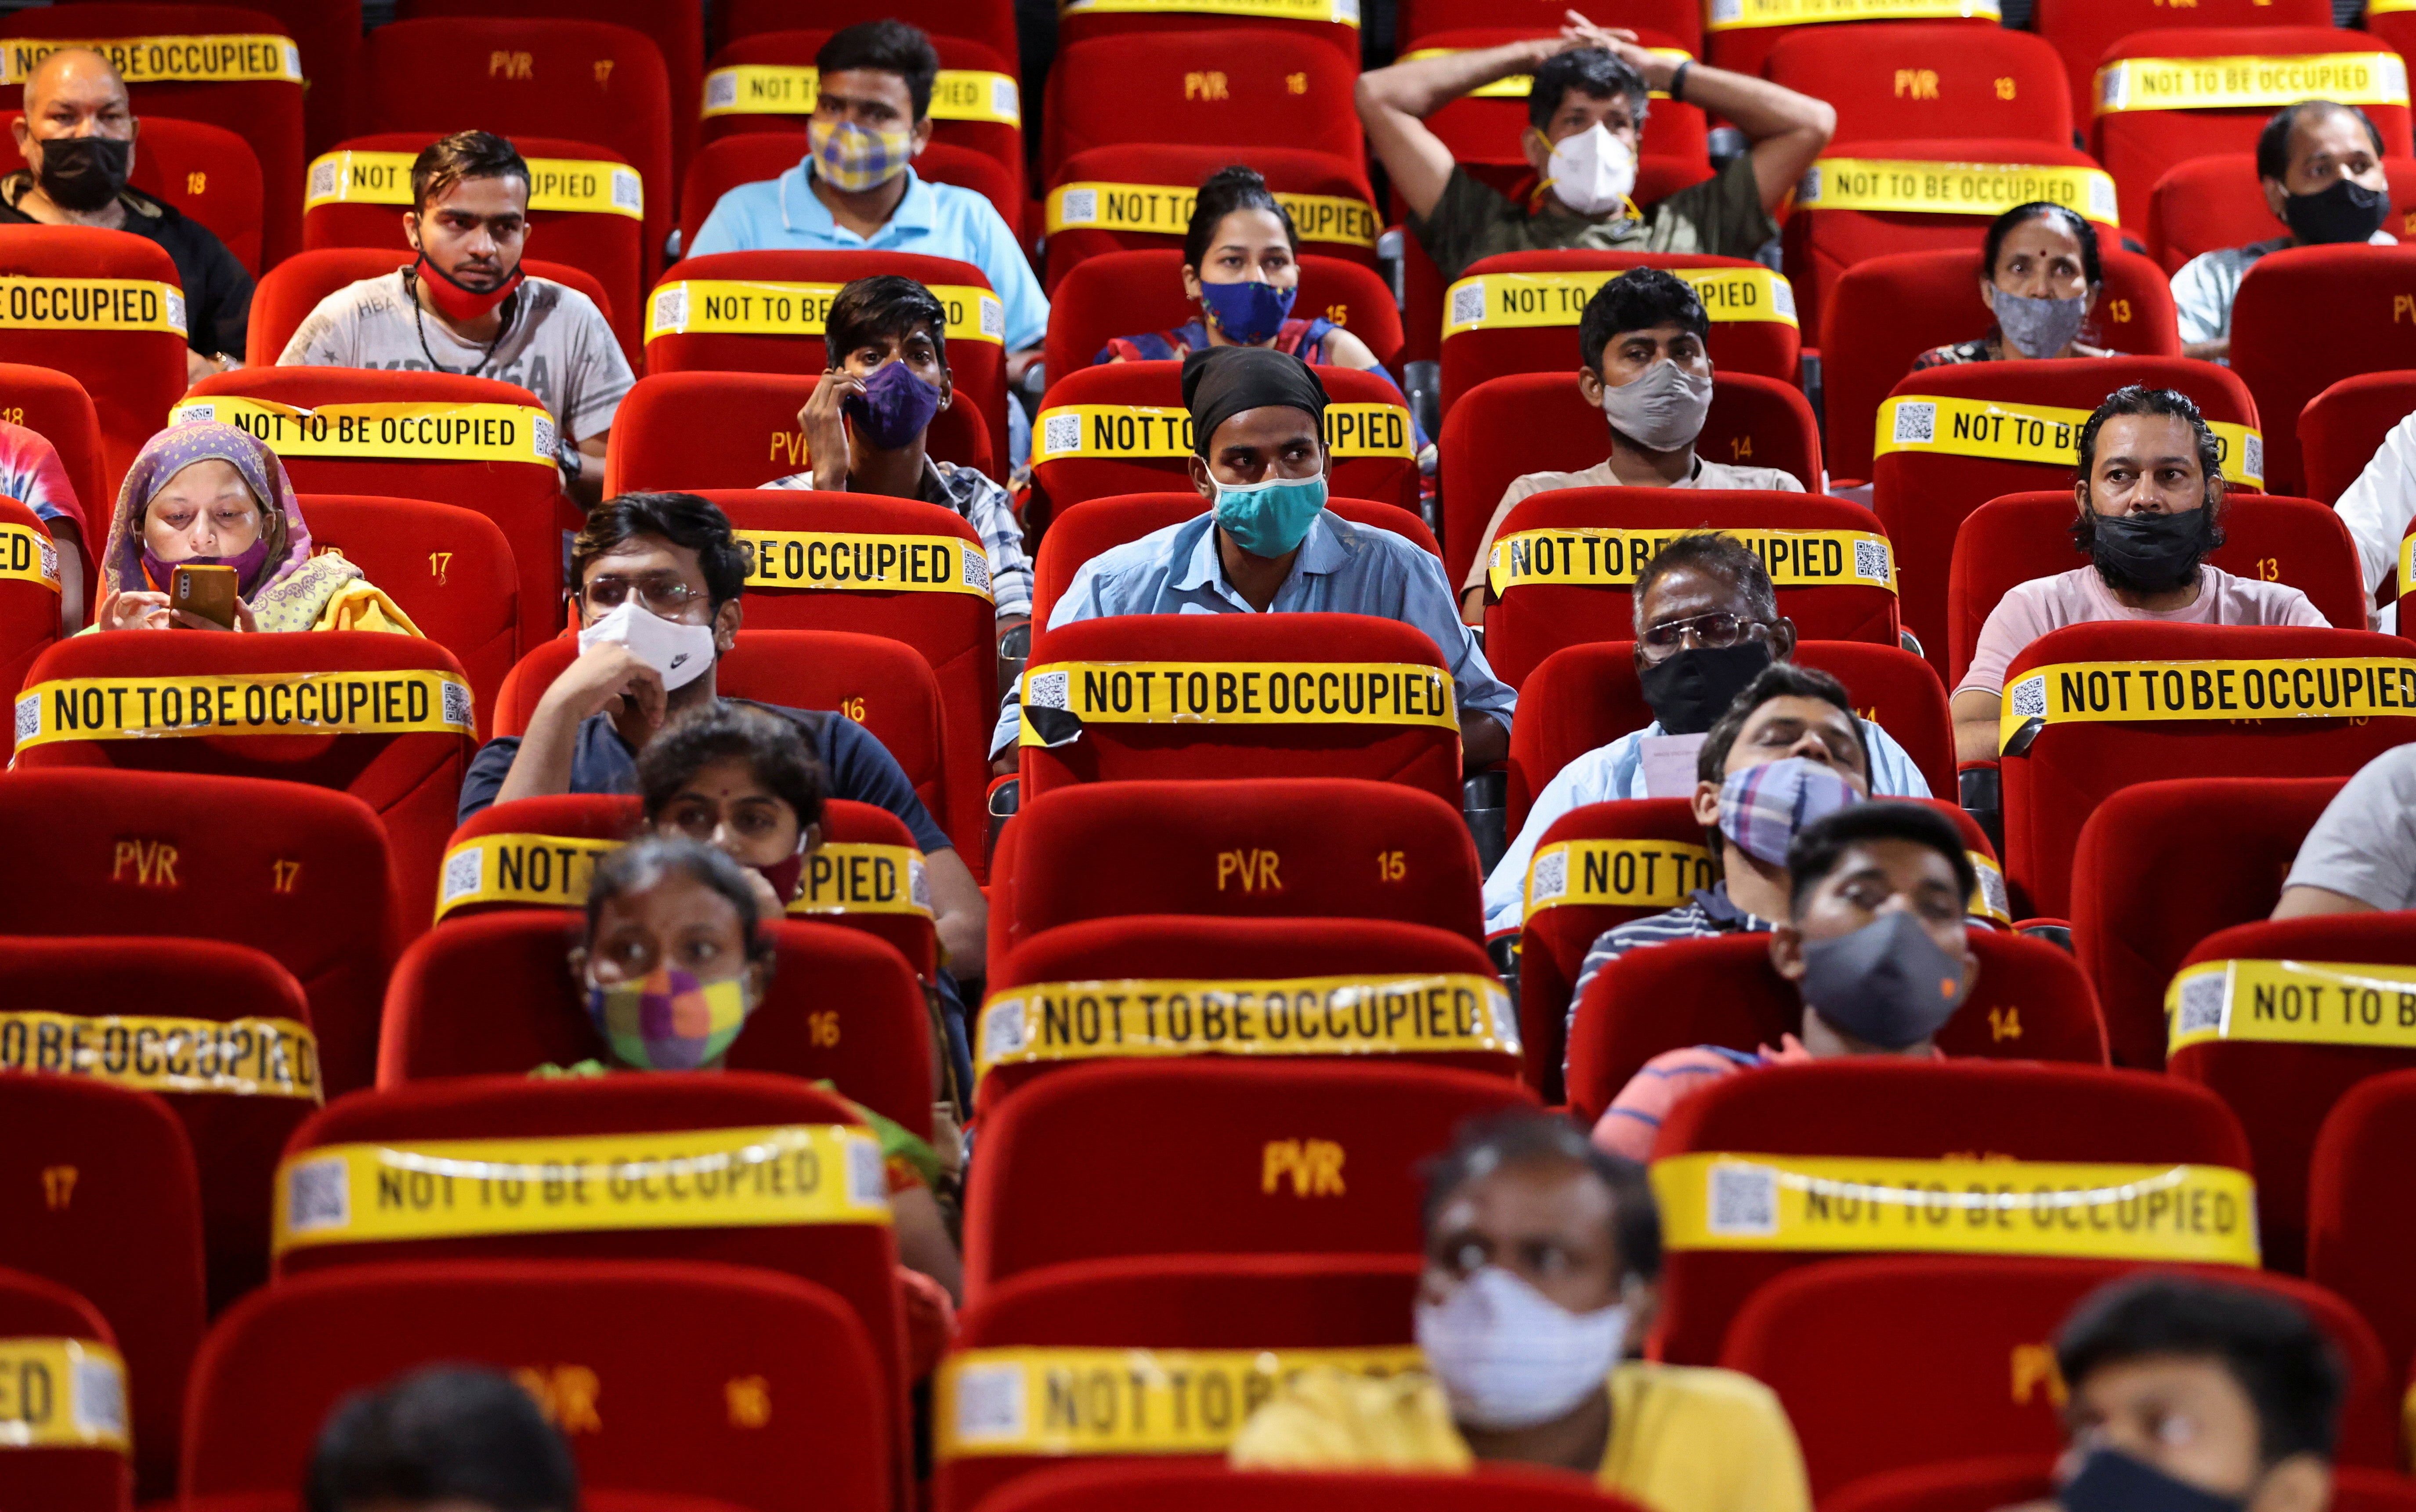 People wait to receive a dose of Covishield, a vaccine manufactured by Serum Institute of India, at a cinema hall in India’s Mumbai city on 17 August 2021